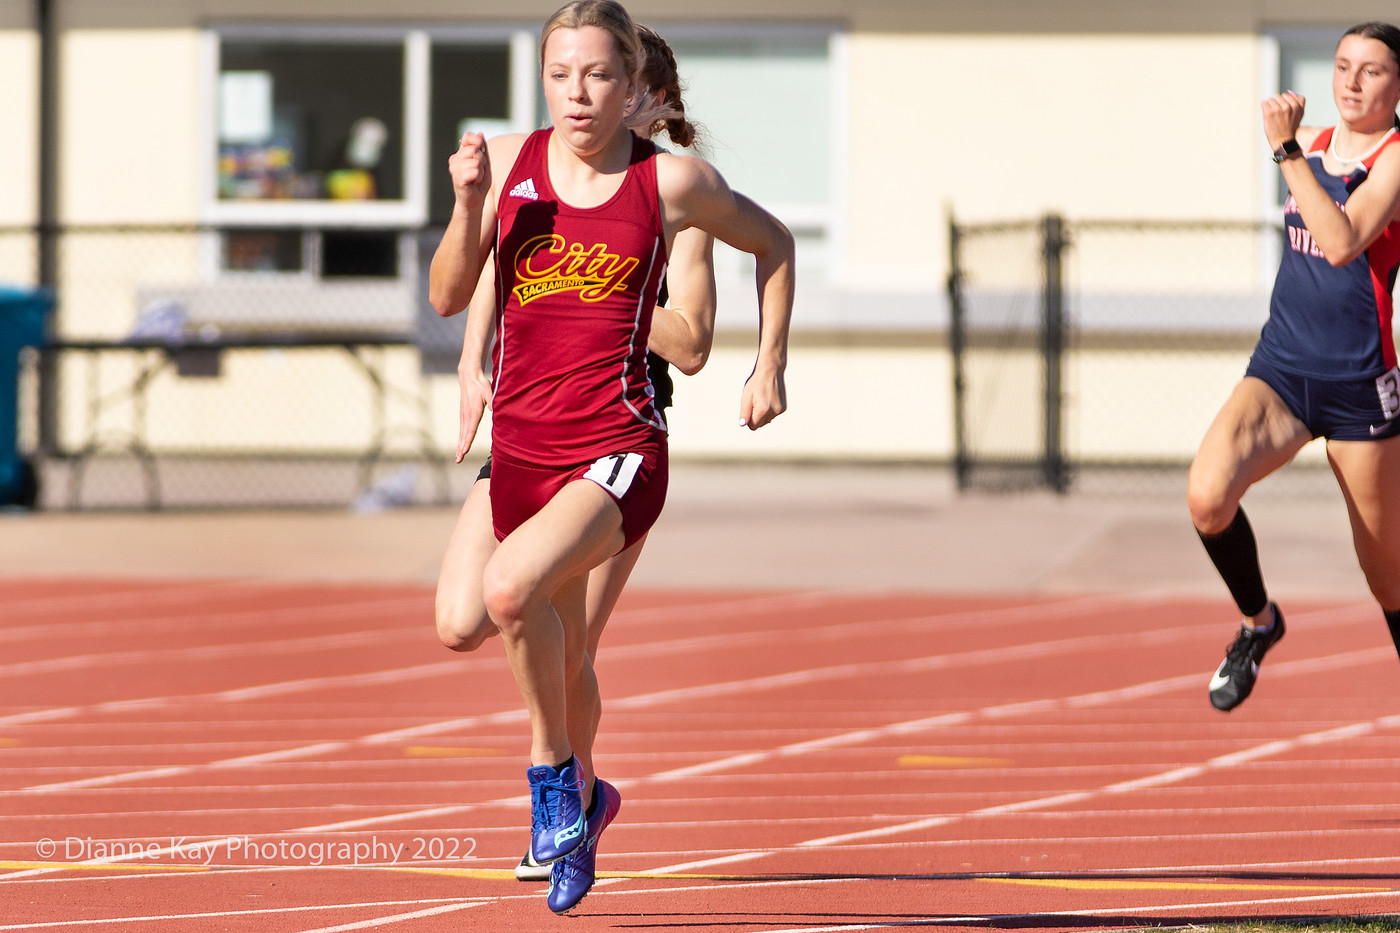 City finishes in 15th place at the Chabot Invite; Norwood takes 2nd in the 800m